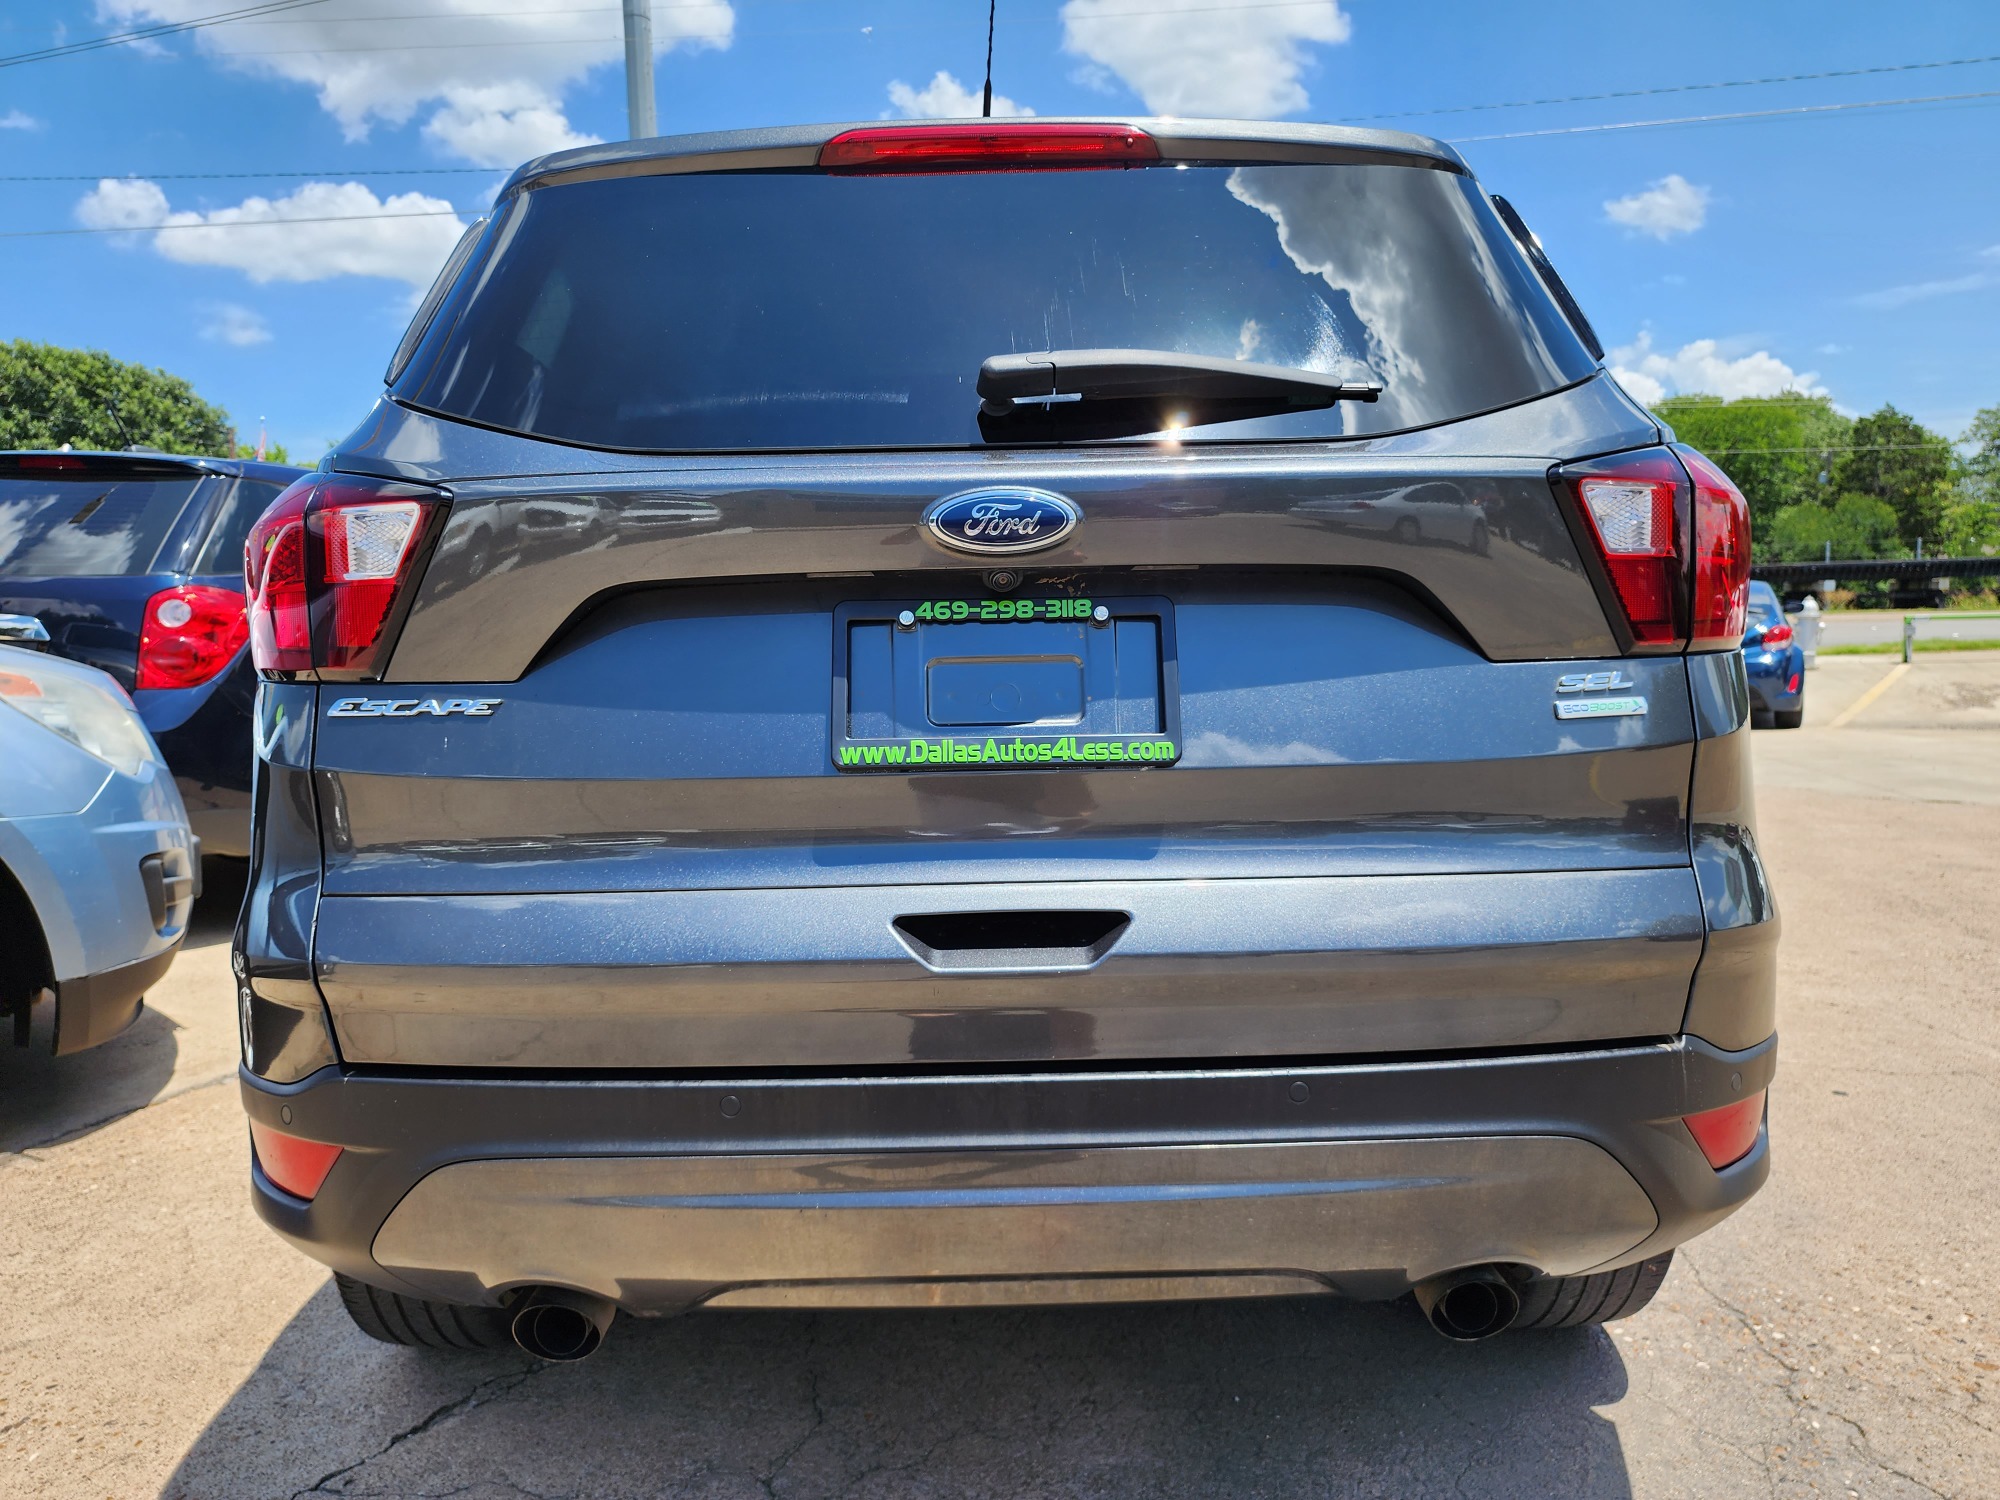 2019 GRAY Ford Escape SEL (1FMCU0HD2KU) , AUTO transmission, located at 2660 S.Garland Avenue, Garland, TX, 75041, (469) 298-3118, 32.885551, -96.655602 - Welcome to DallasAutos4Less, one of the Premier BUY HERE PAY HERE Dealers in the North Dallas Area. We specialize in financing to people with NO CREDIT or BAD CREDIT. We need proof of income, proof of residence, and a ID. Come buy your new car from us today!! This is a Super Clean 2019 FORD ESCAP - Photo #4